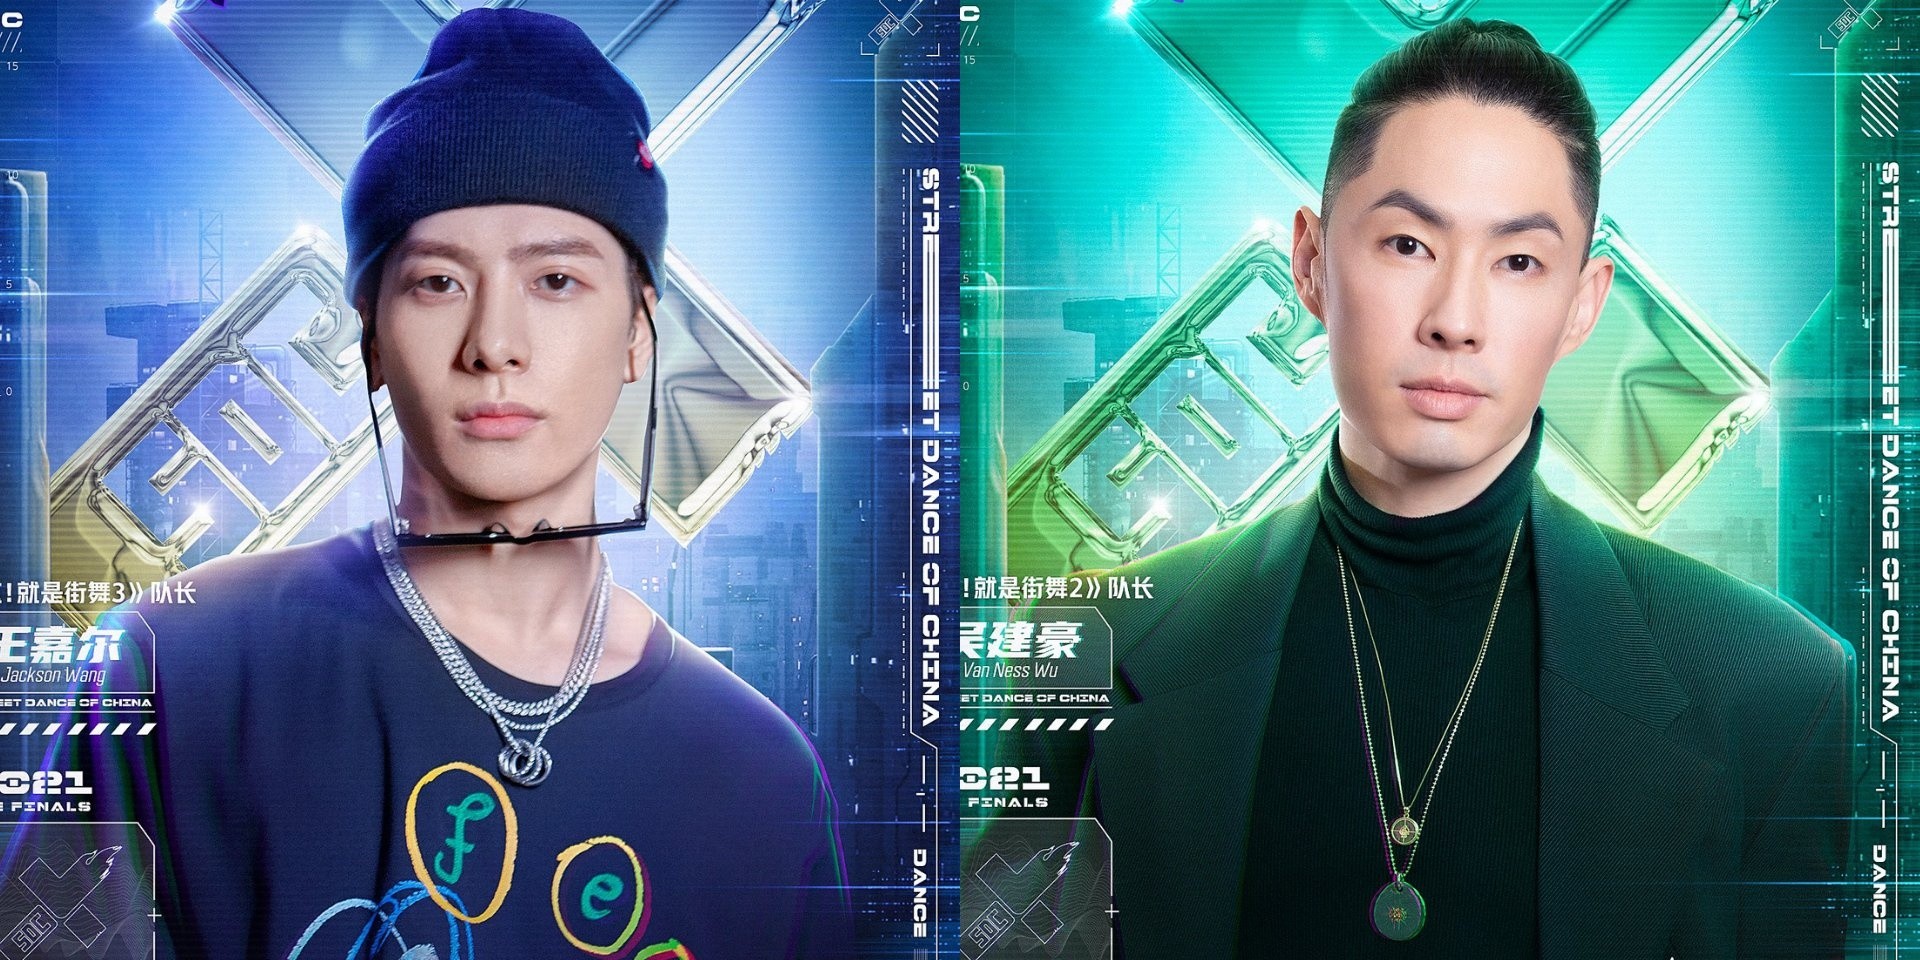 Jackson Wang, Vanness Wu, and more to appear at Street Dance of China grand finale